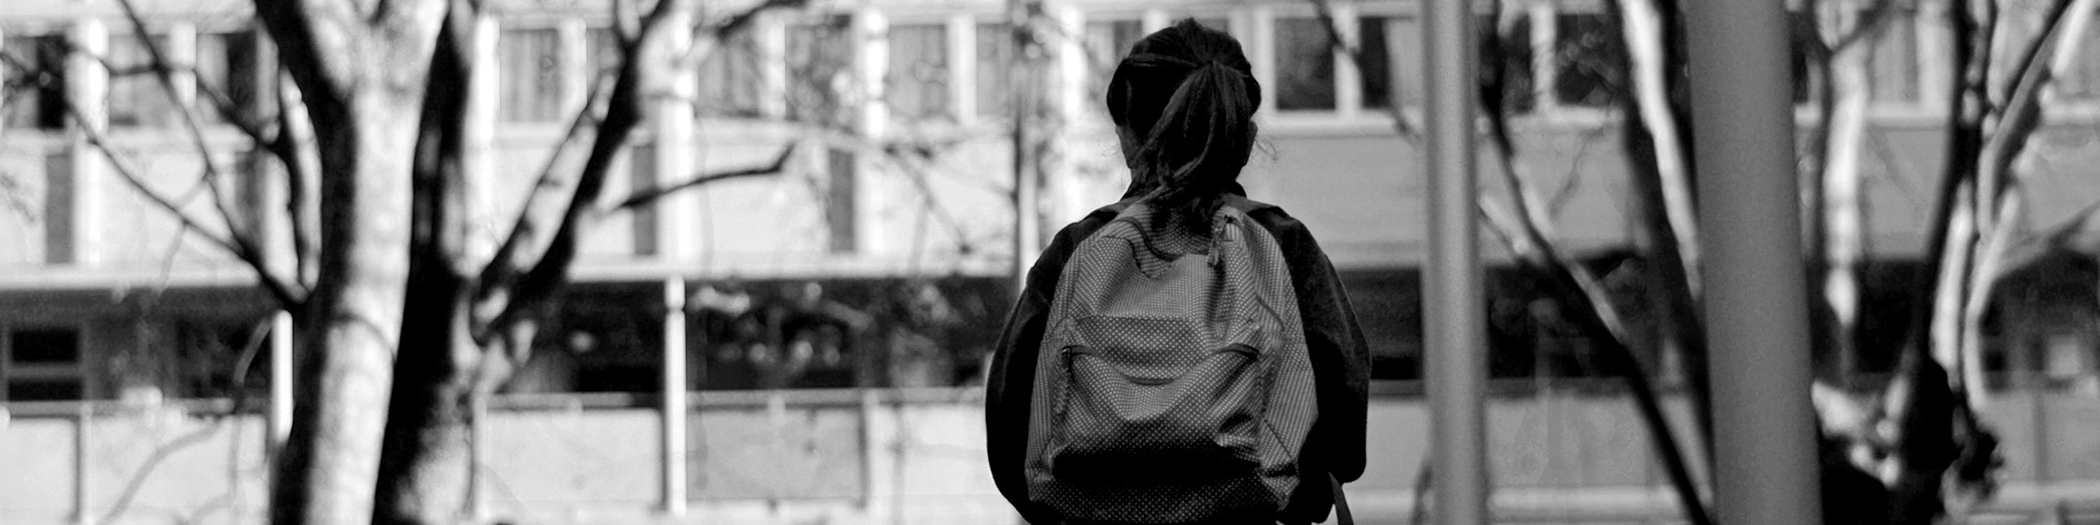 Girl with backpack banner